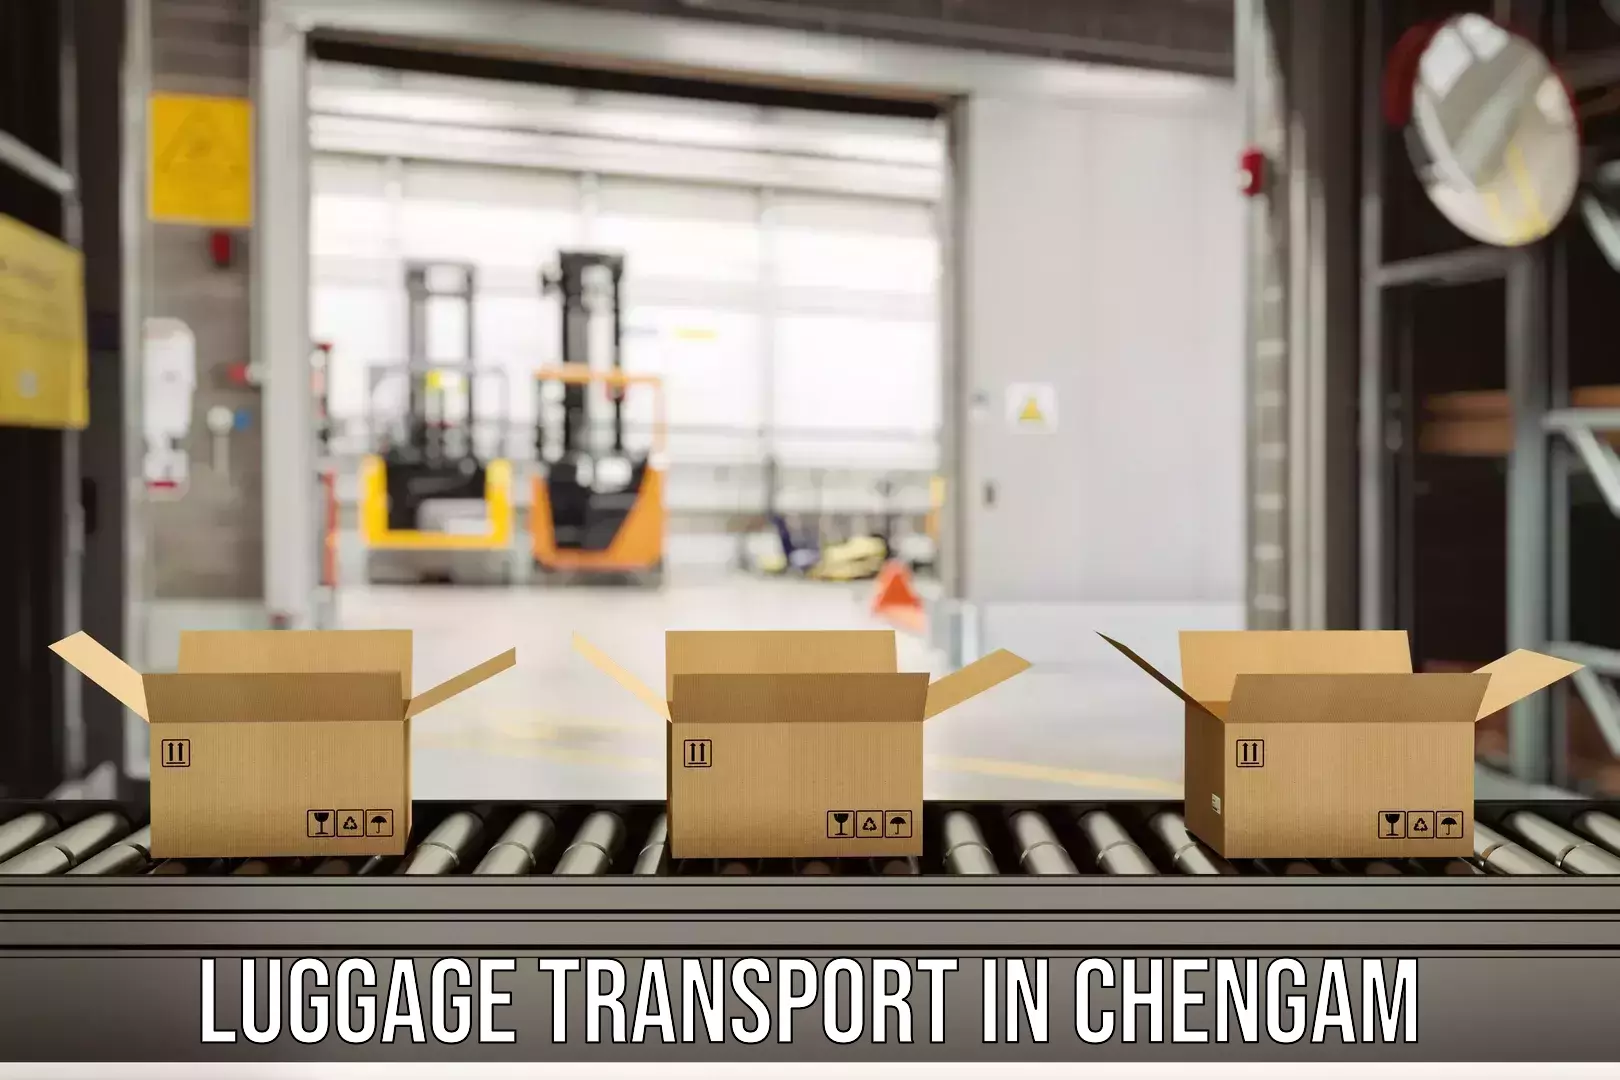 Business luggage transport in Chengam